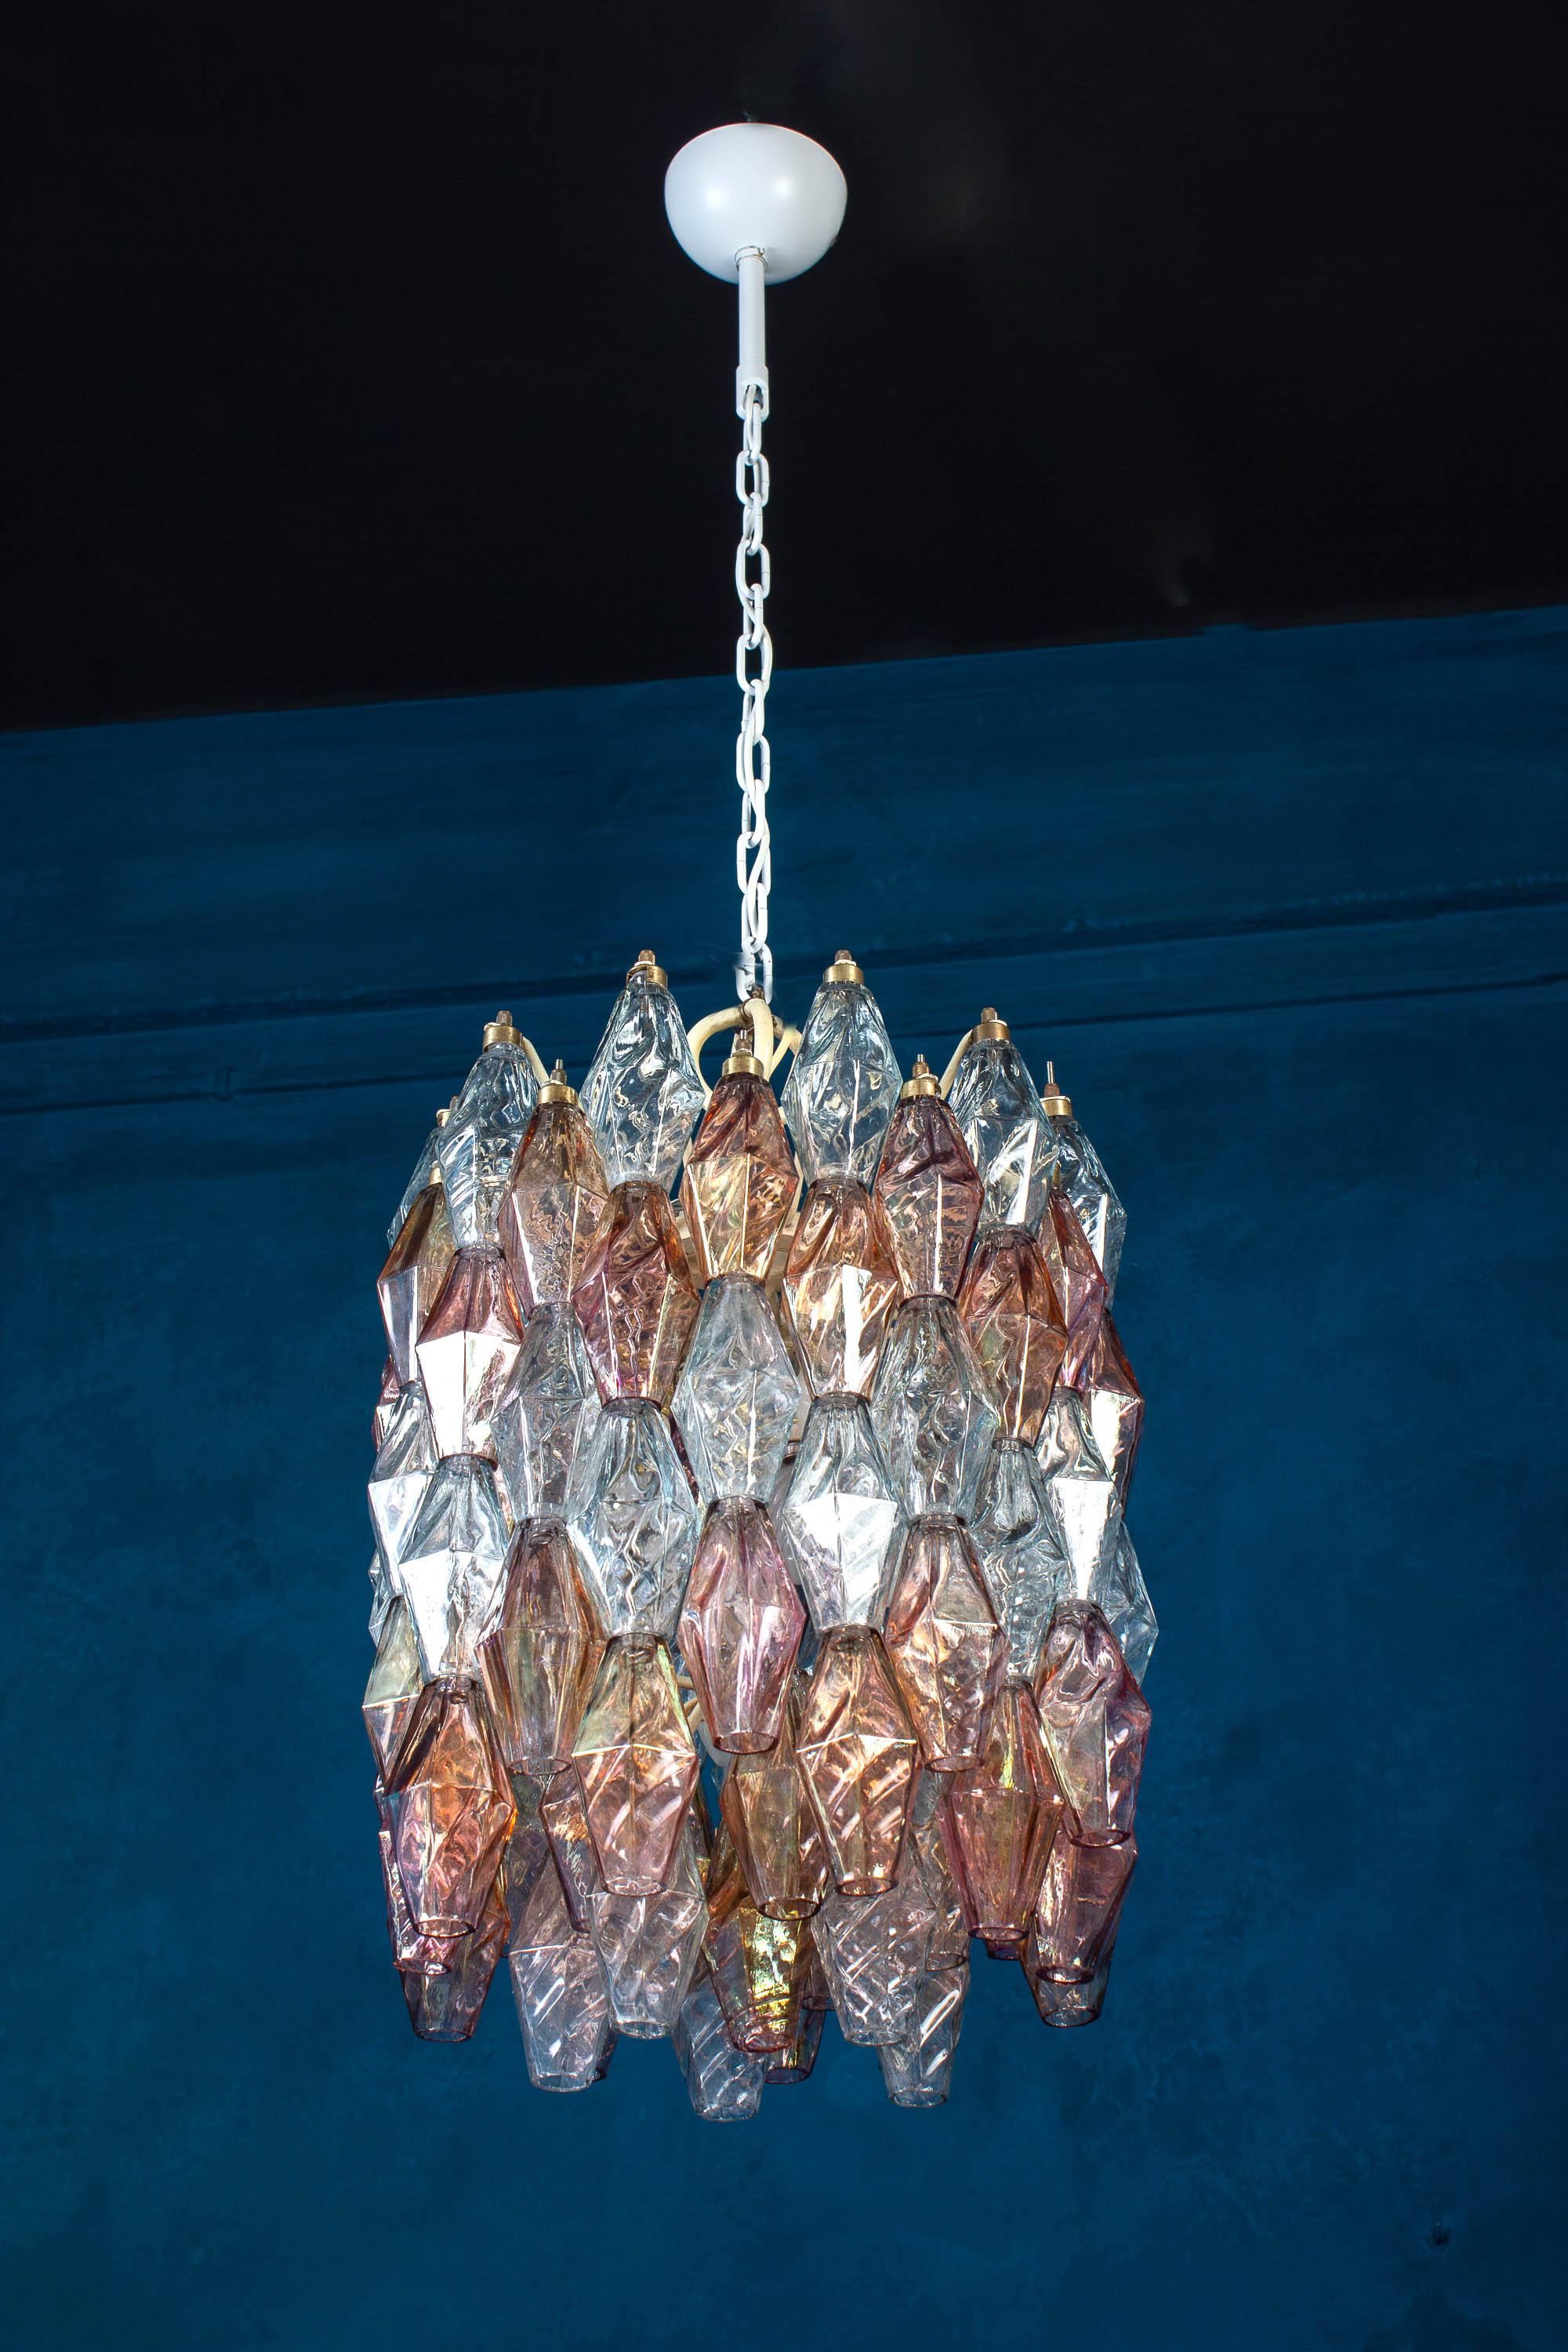 Pair of Pink and Light Blu Poliedri Chandelier C. Scarpa Venini Variation, 1970' For Sale 6